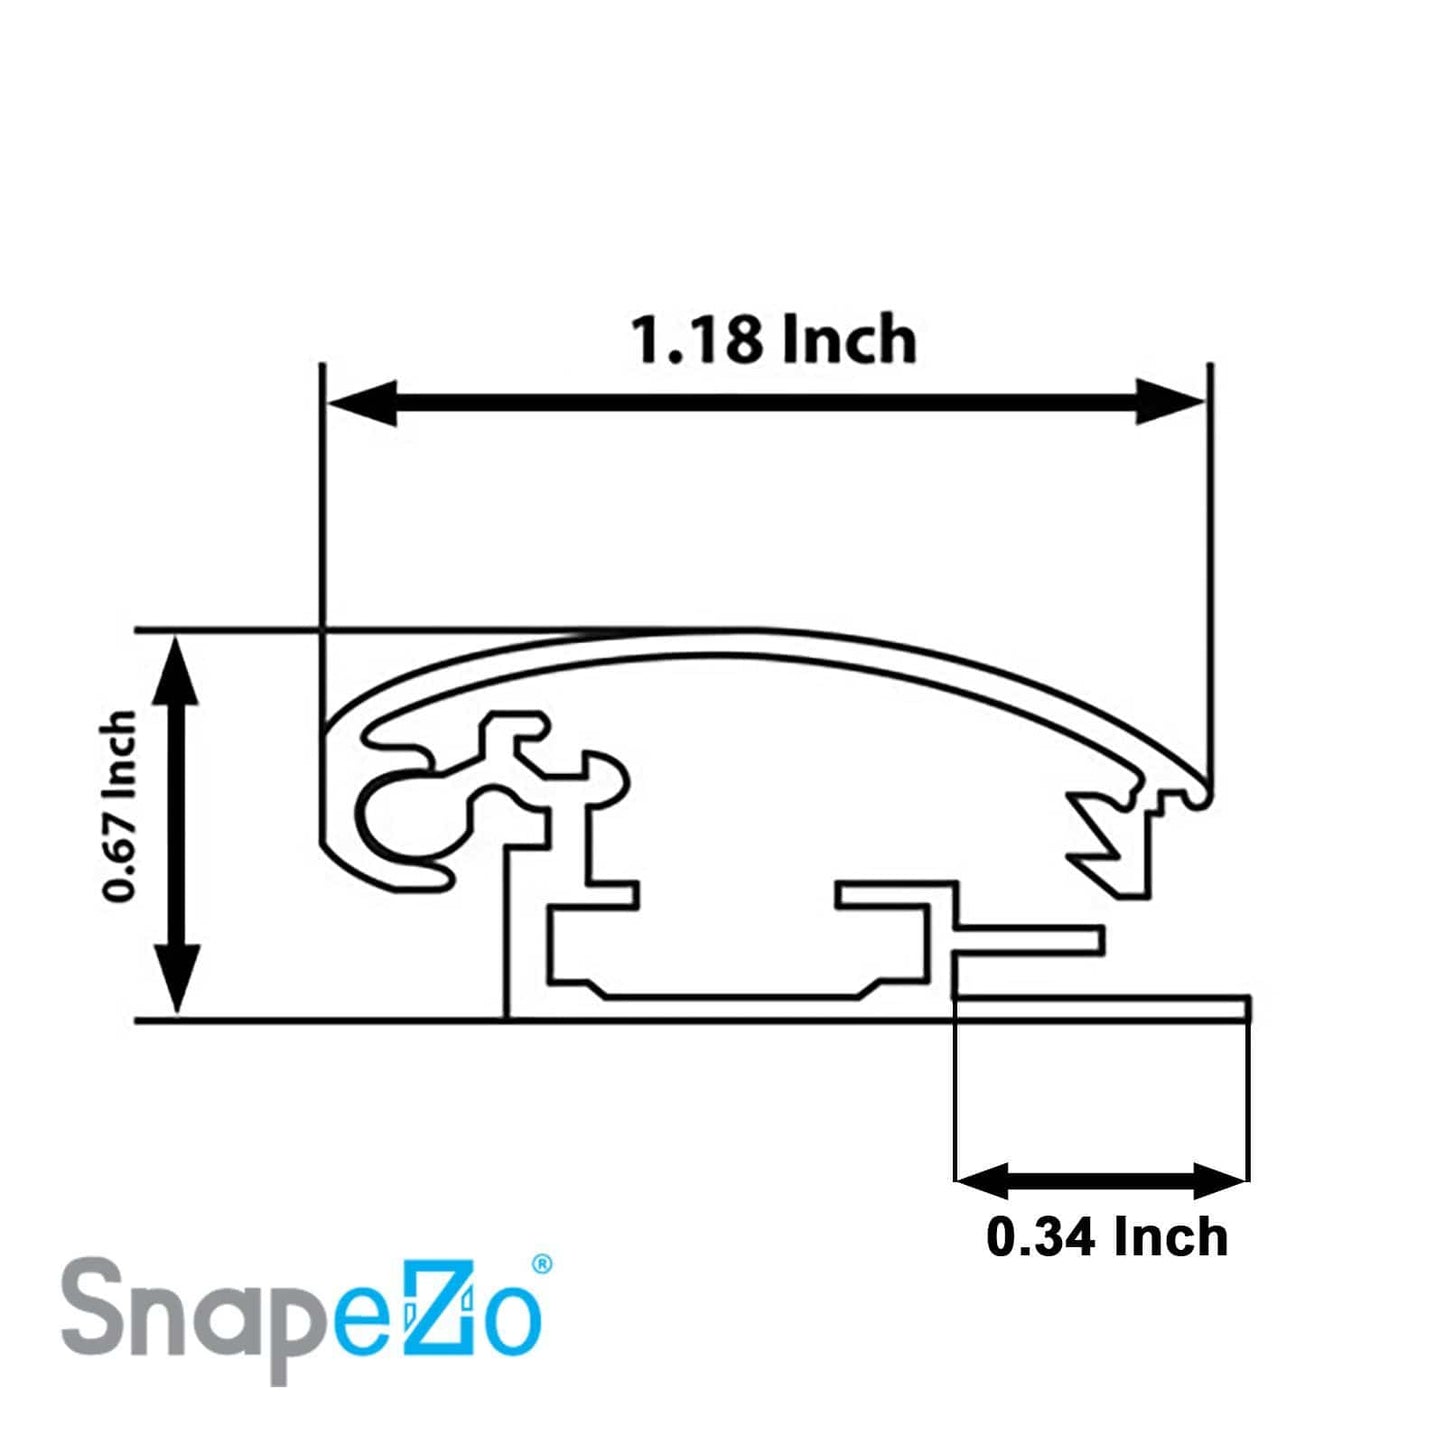 22x56 Blue SnapeZo® Snap Frame - 1.7" Profile - Snap Frames Direct